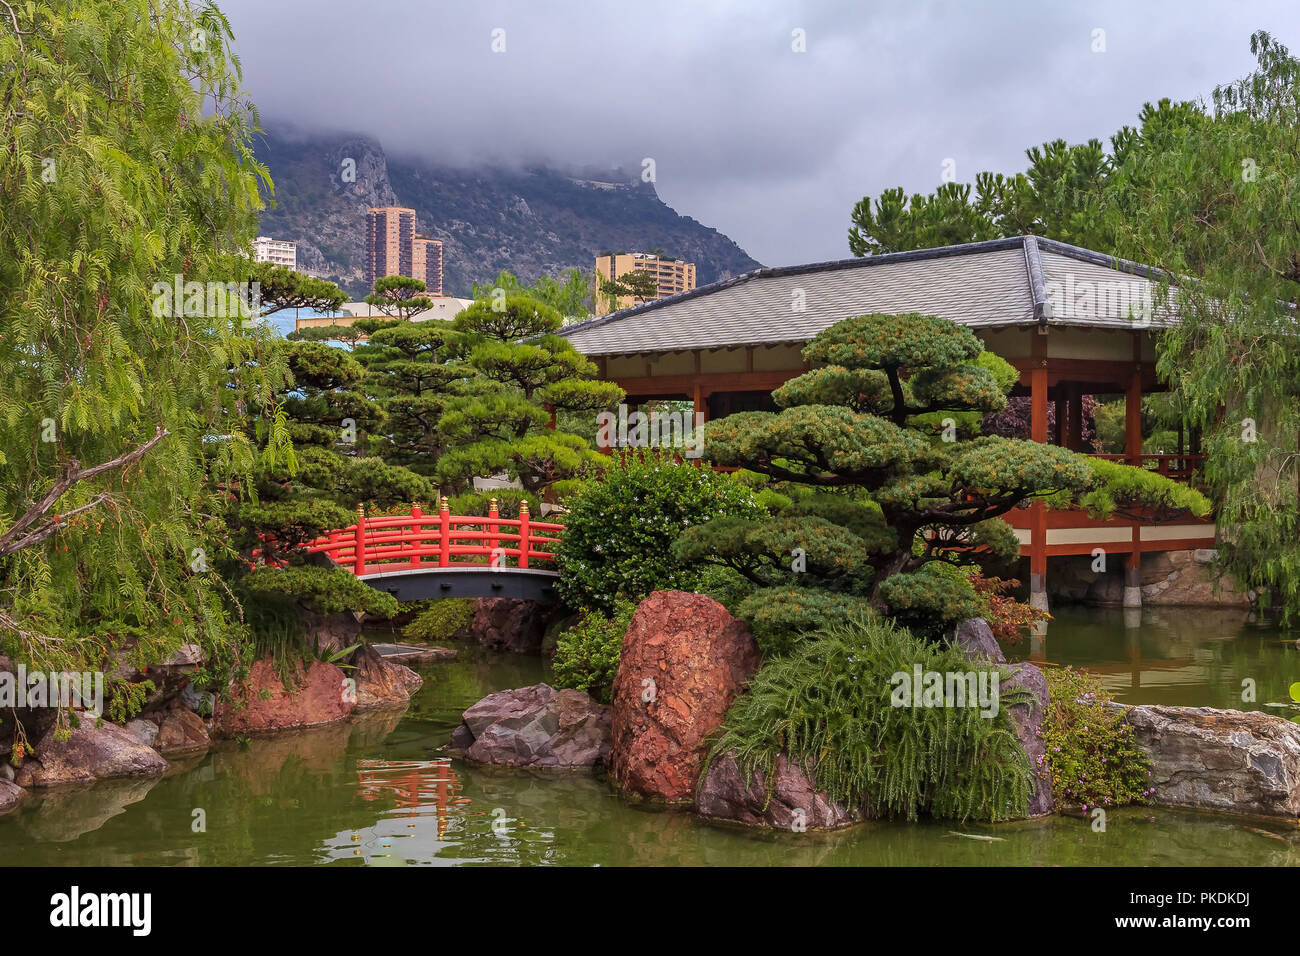 Monaco, Monte Carlo - October 13, 2013: Japanese Garden or Jardin Japonais with residential buildings in the background Stock Photo